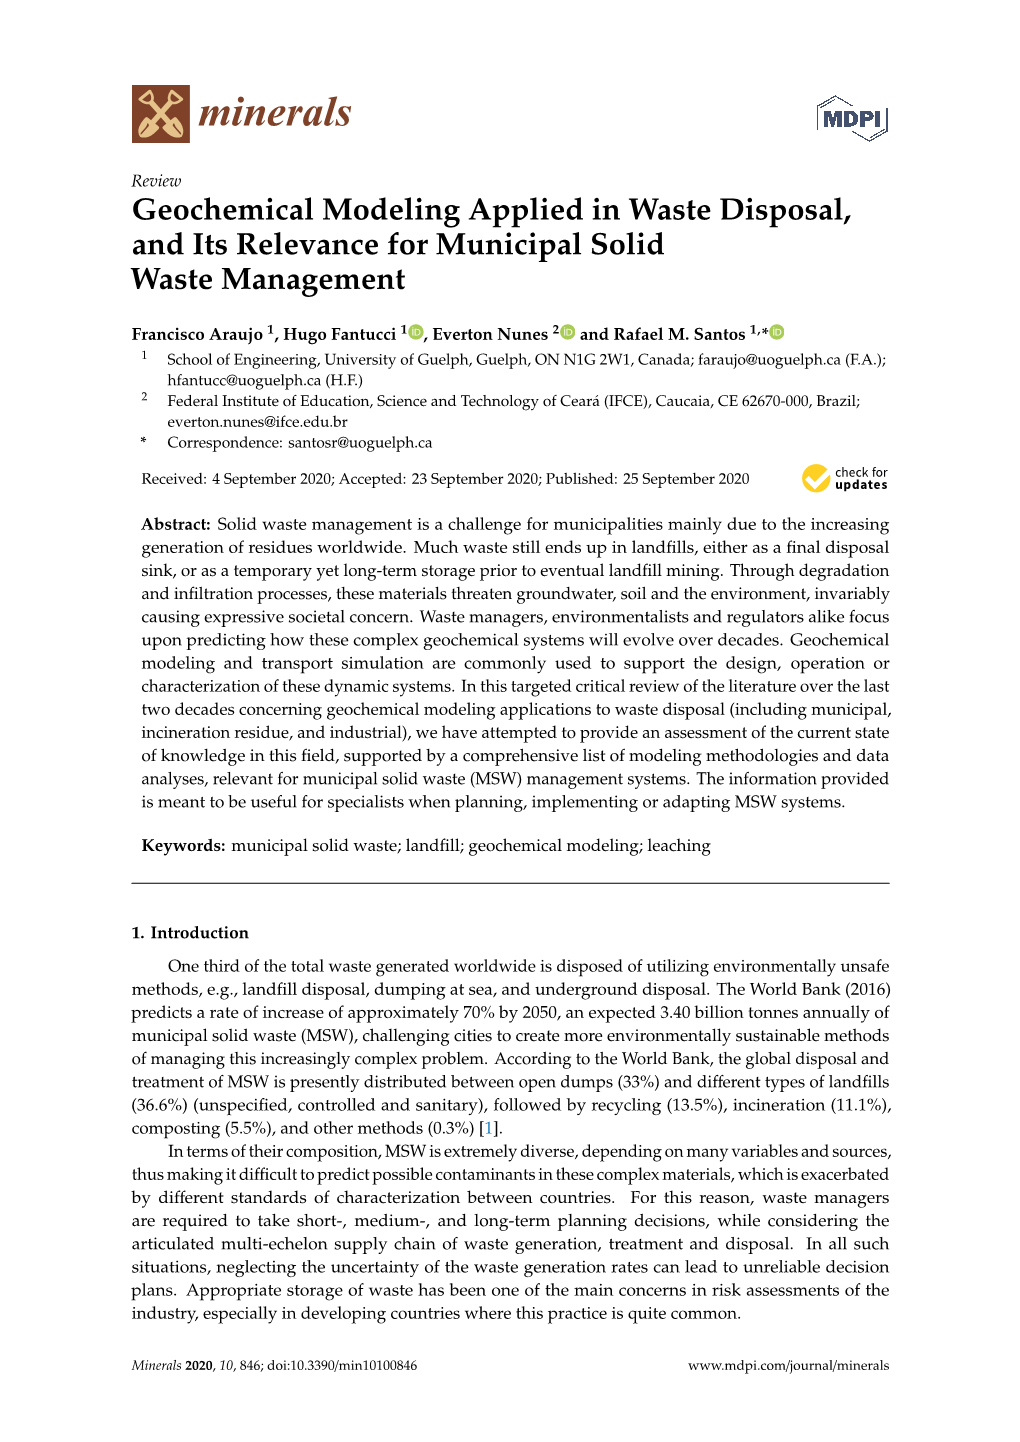 Geochemical Modeling Applied in Waste Disposal, and Its Relevance for Municipal Solid Waste Management